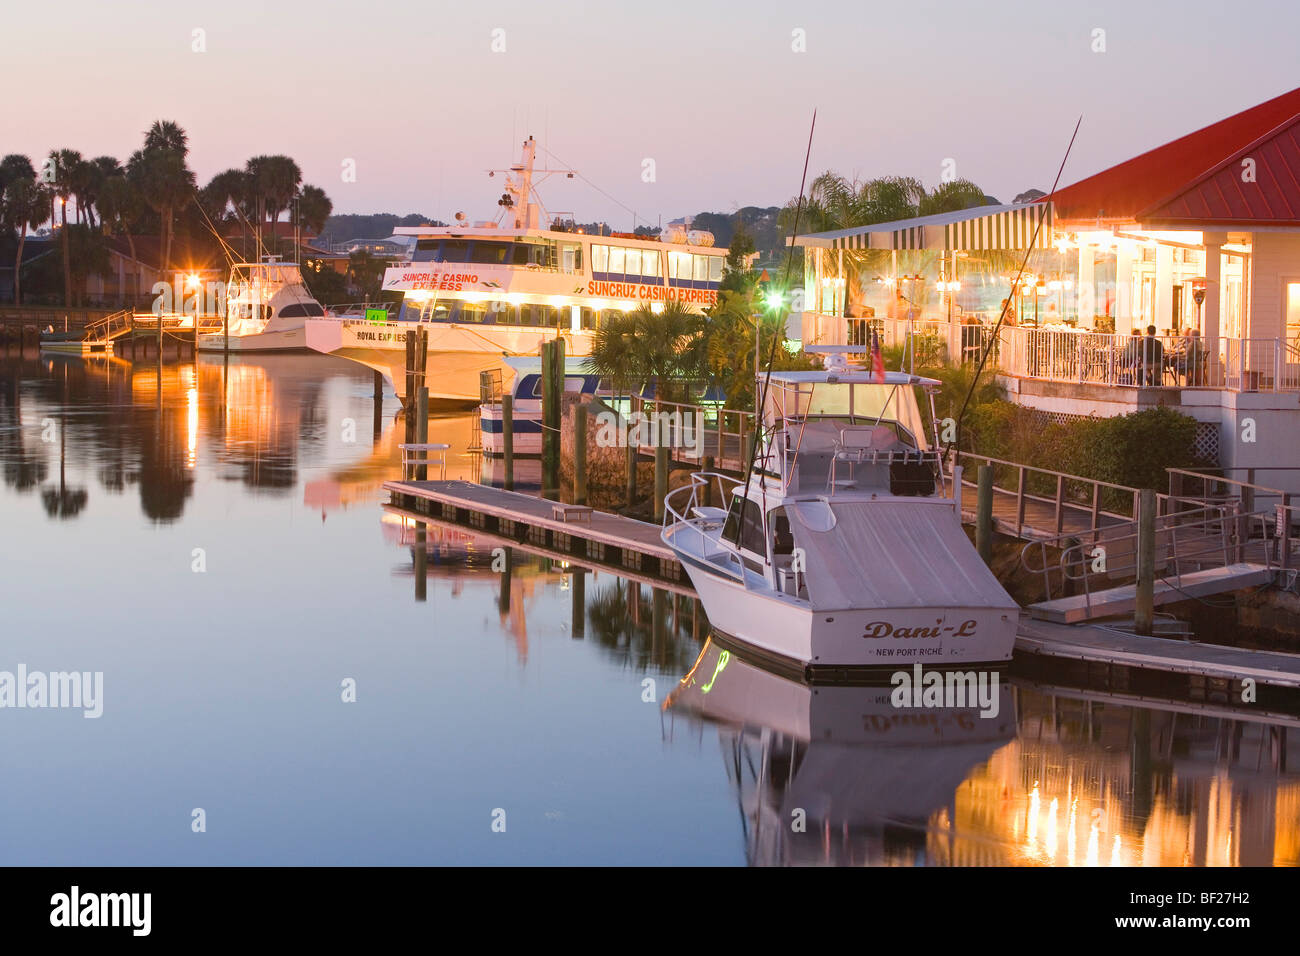 The illuminated Catches Waterfront Grille restaurant on the waterfront in the evening, Tampa Bay, Port Ritchey, Florida, USA Stock Photo